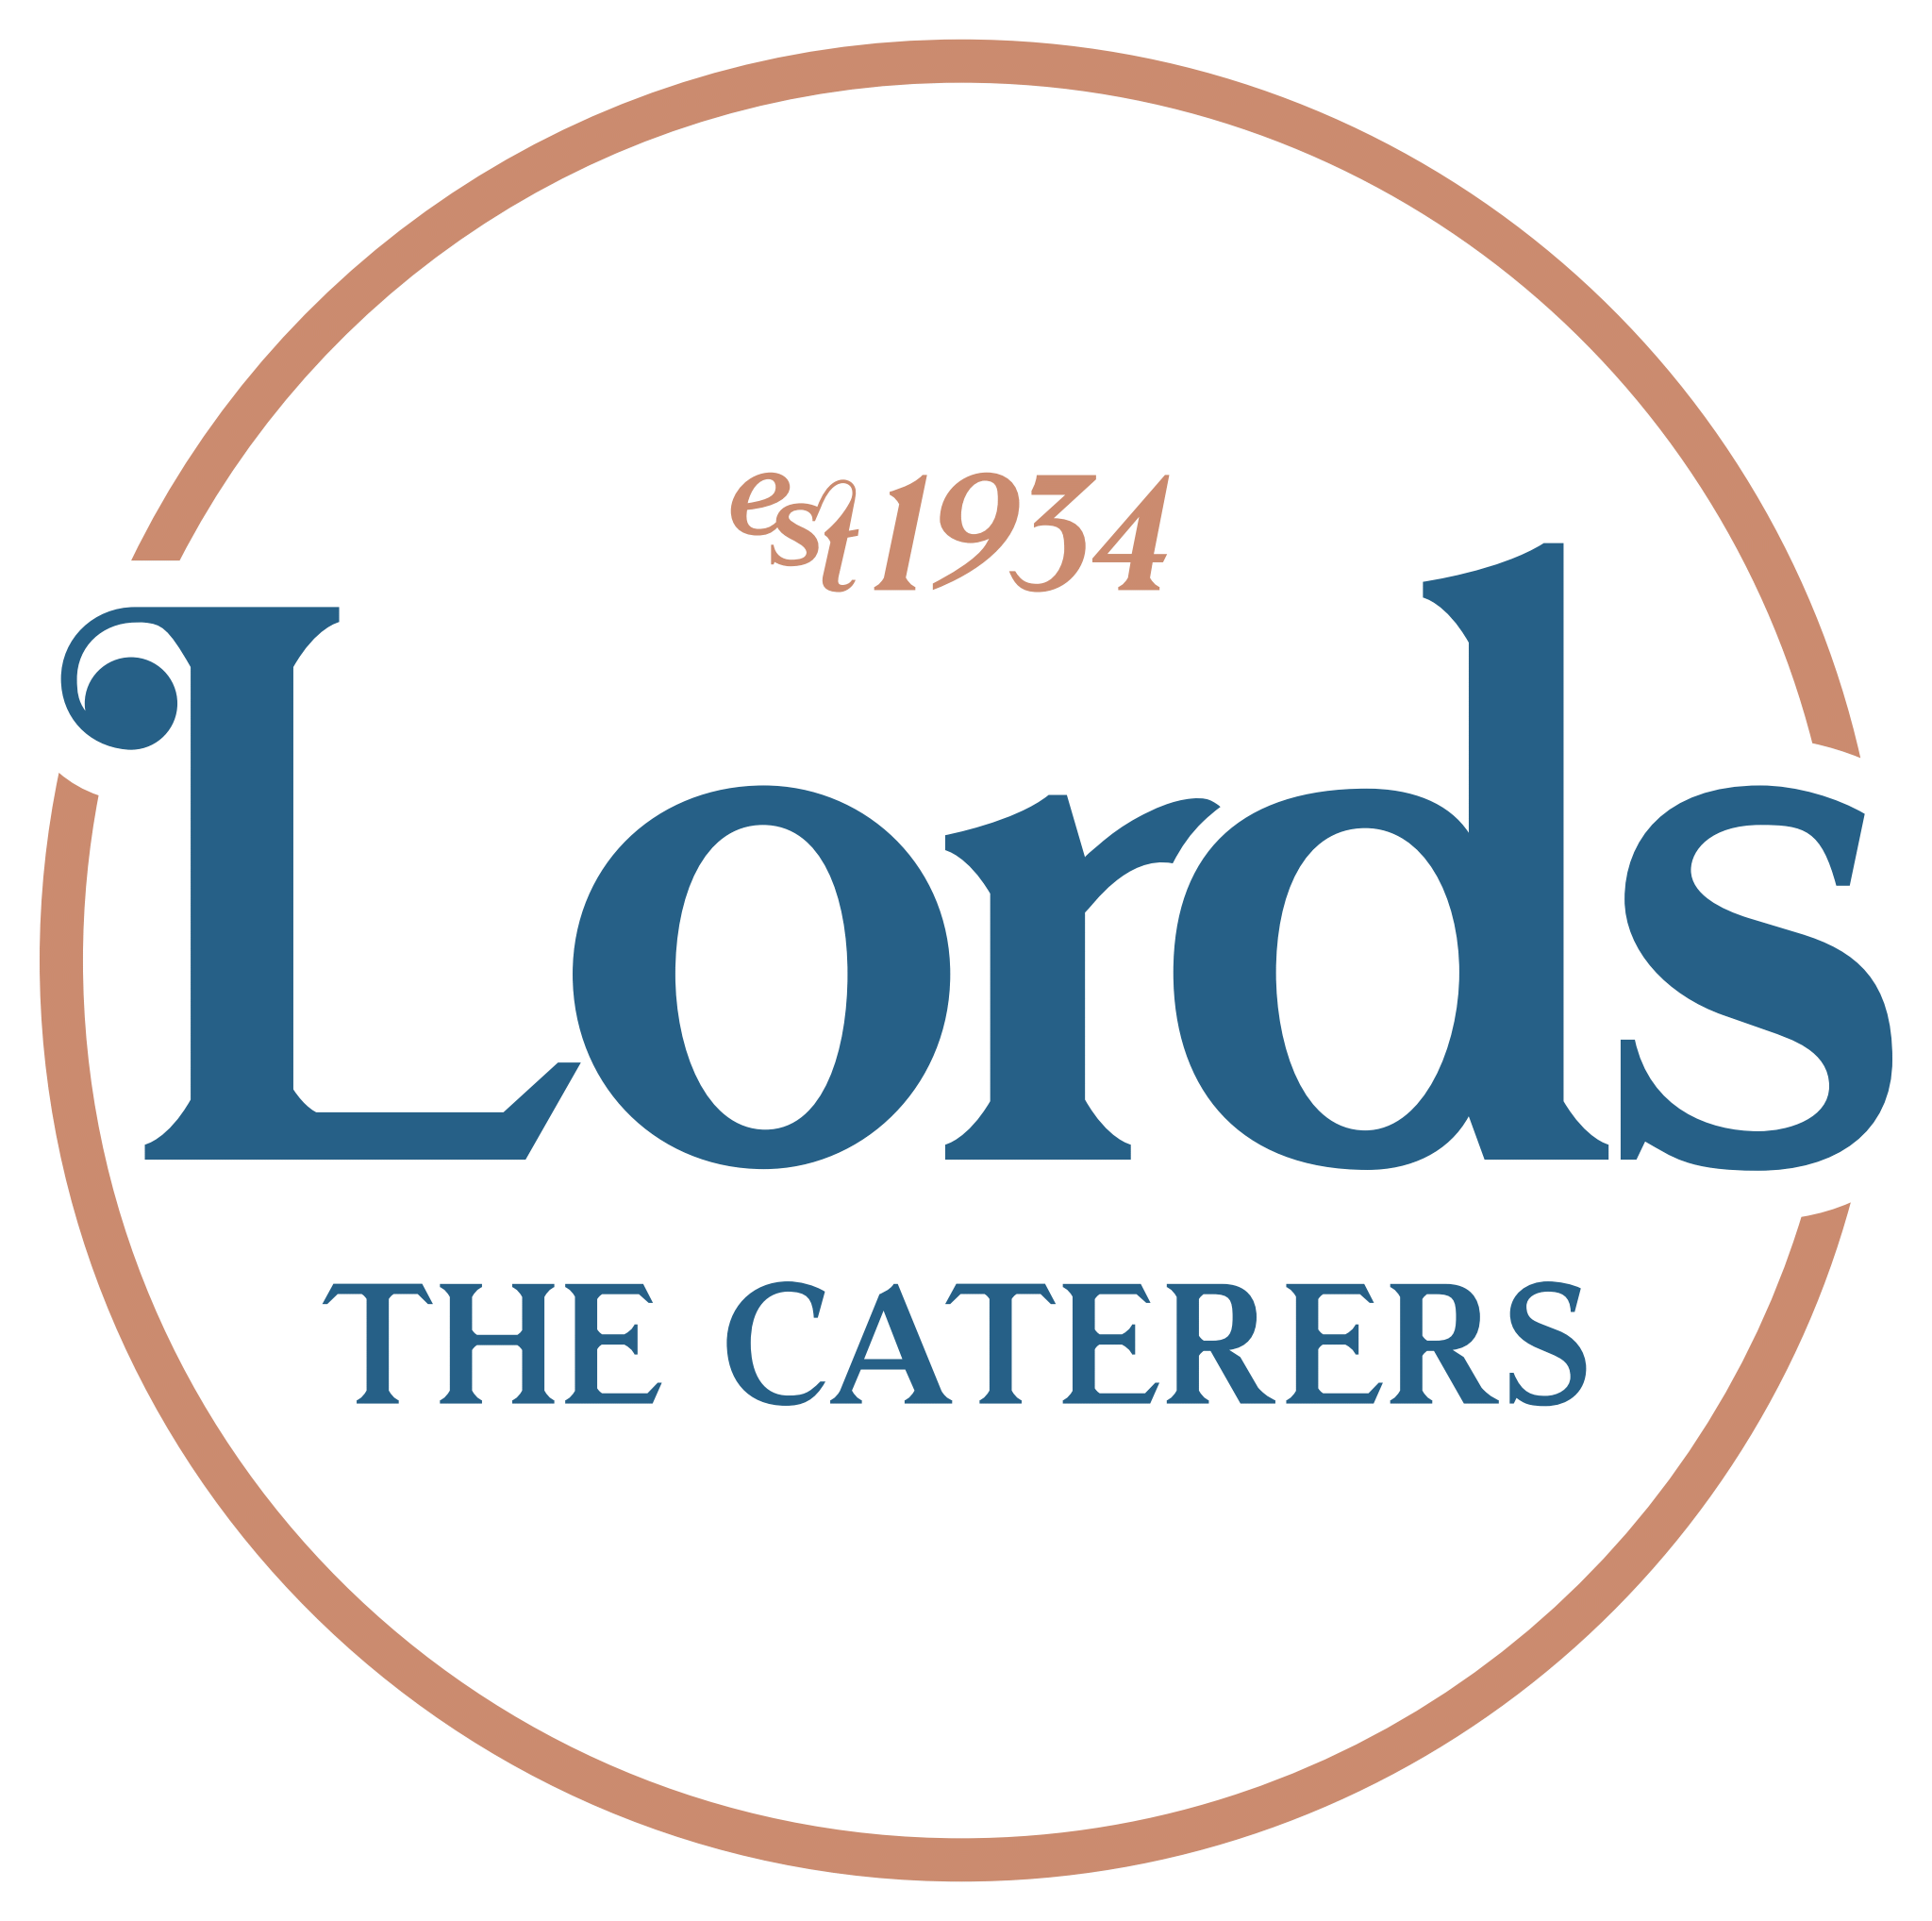 (c) Lordscaterers.co.uk